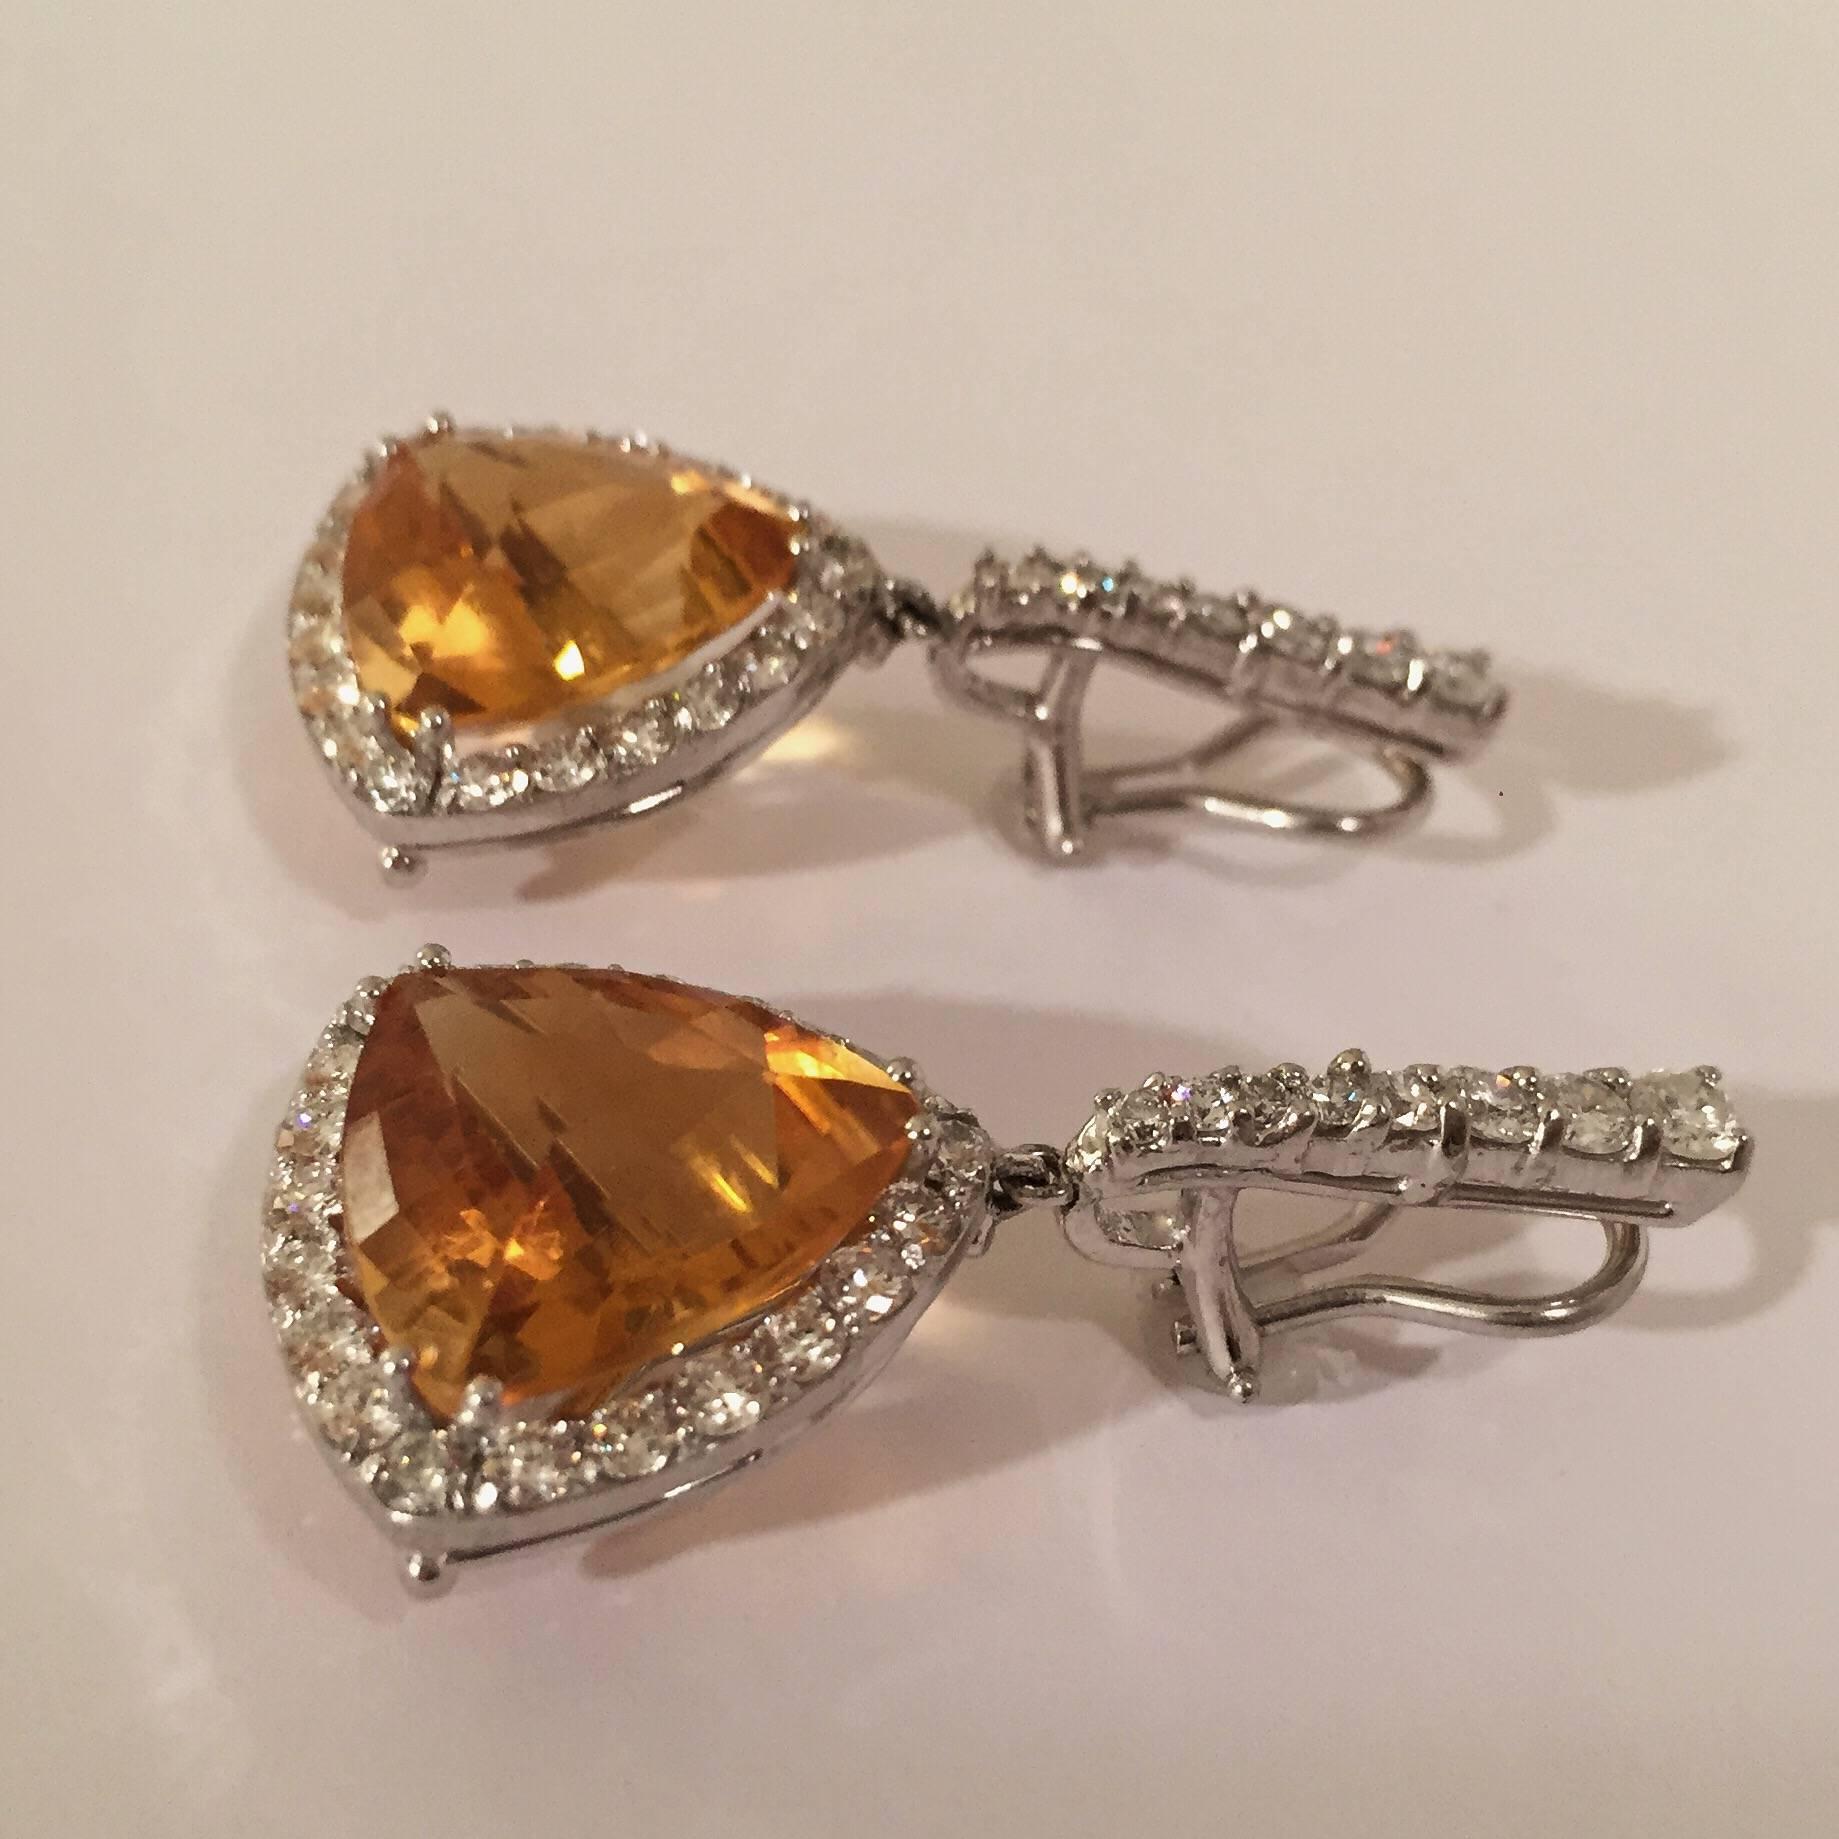 18kt White Gold hanging earrings with triangular cushion cut orange citrine surrounded  by approximately 4.50cts of White Diamonds.

The citrine is approximately 3/4